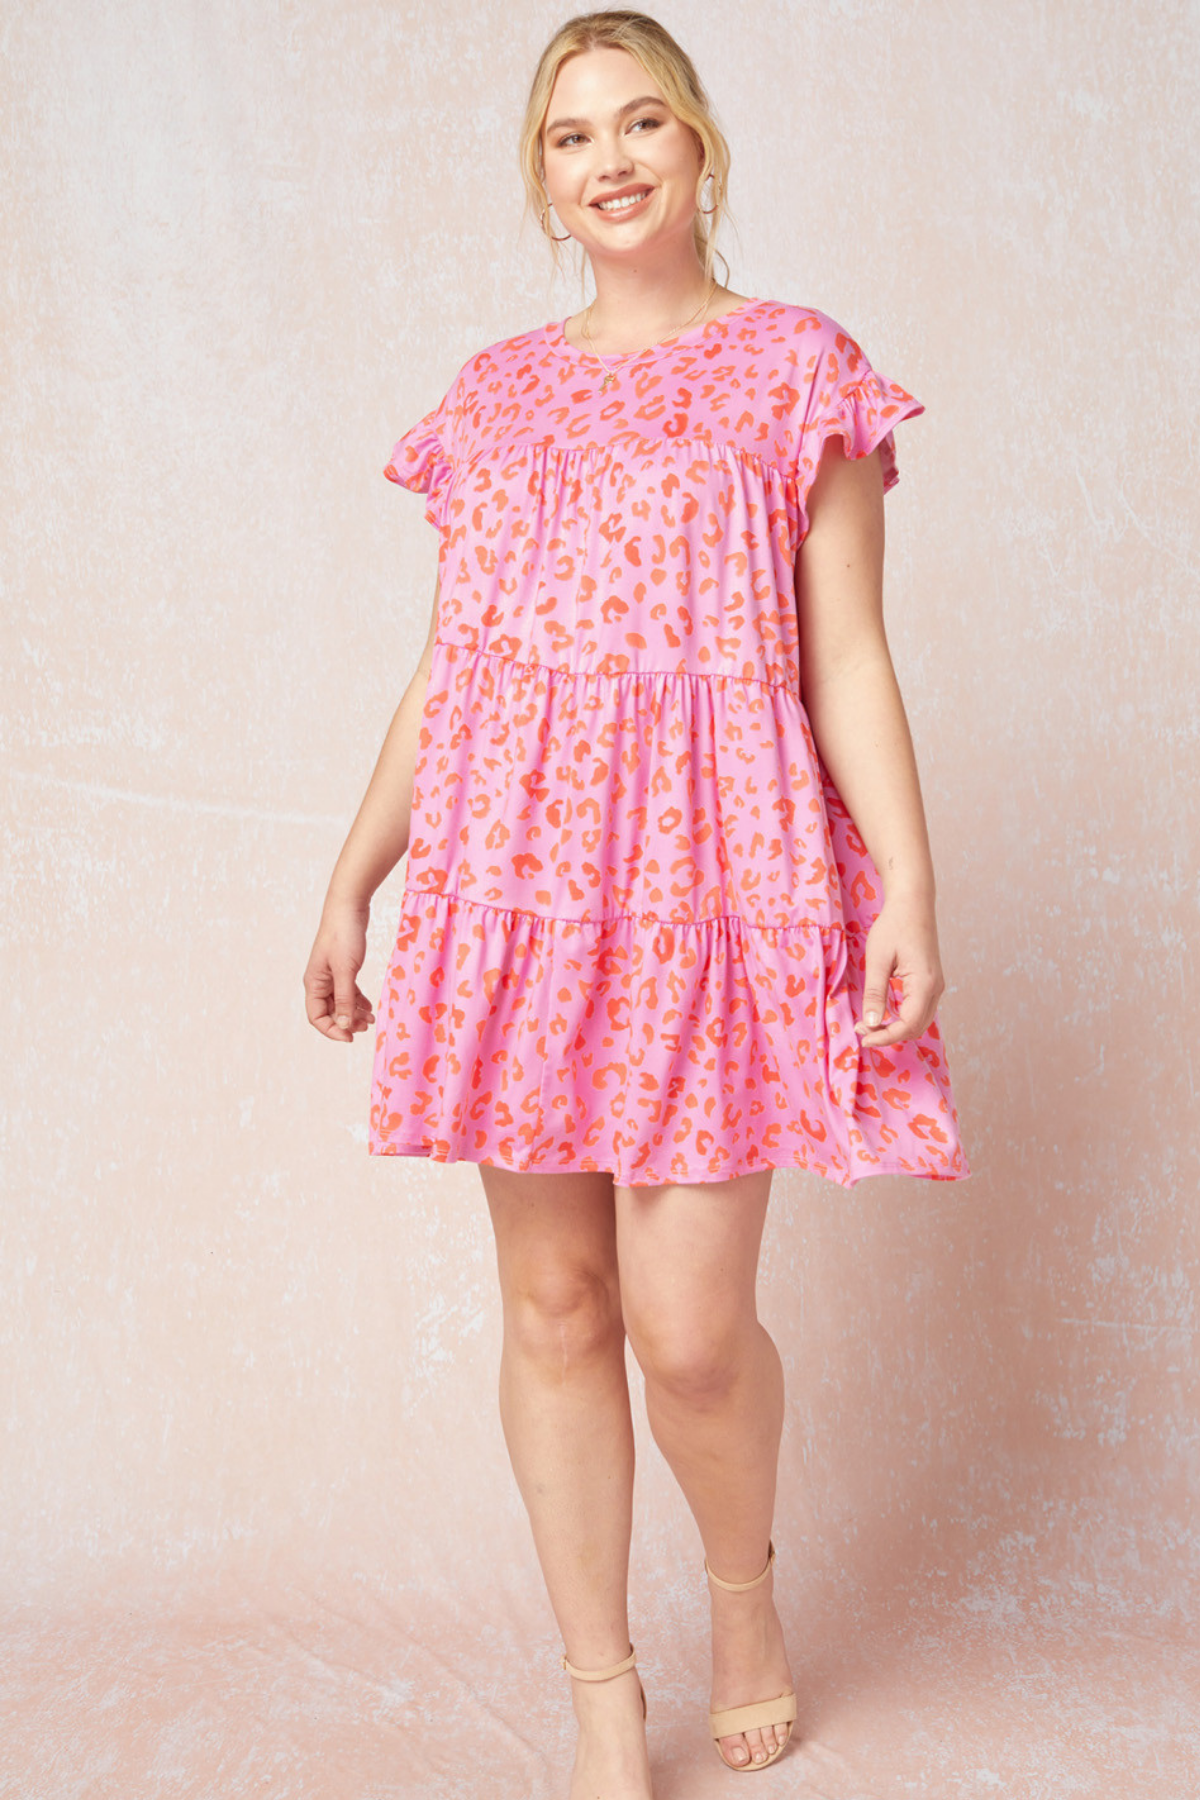 model wearing a short sleeve tiered loose pink dress with orange cheetah spots on it